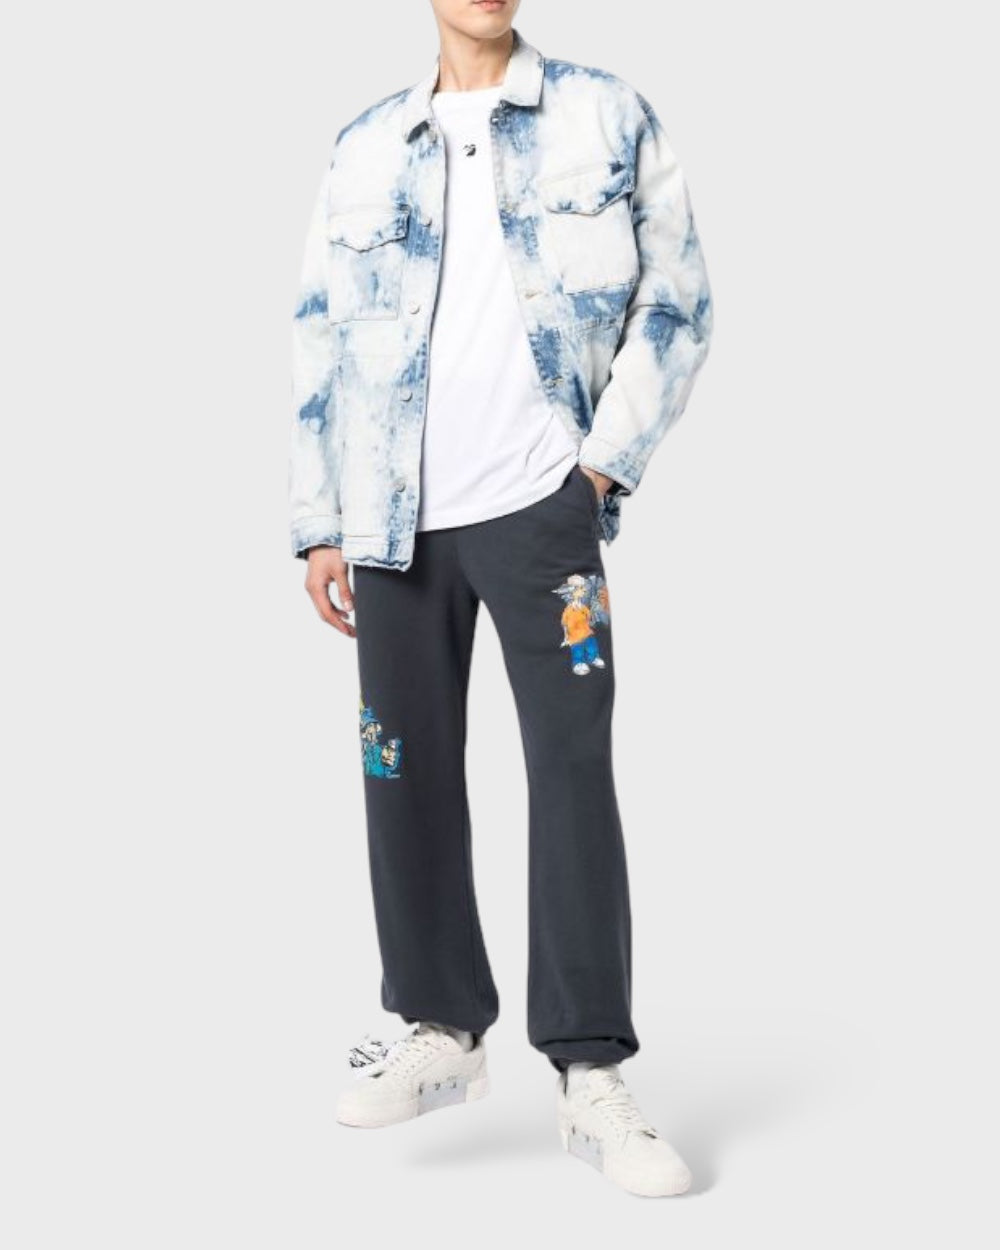 Off-White Gray Cotton Jeans & Pant